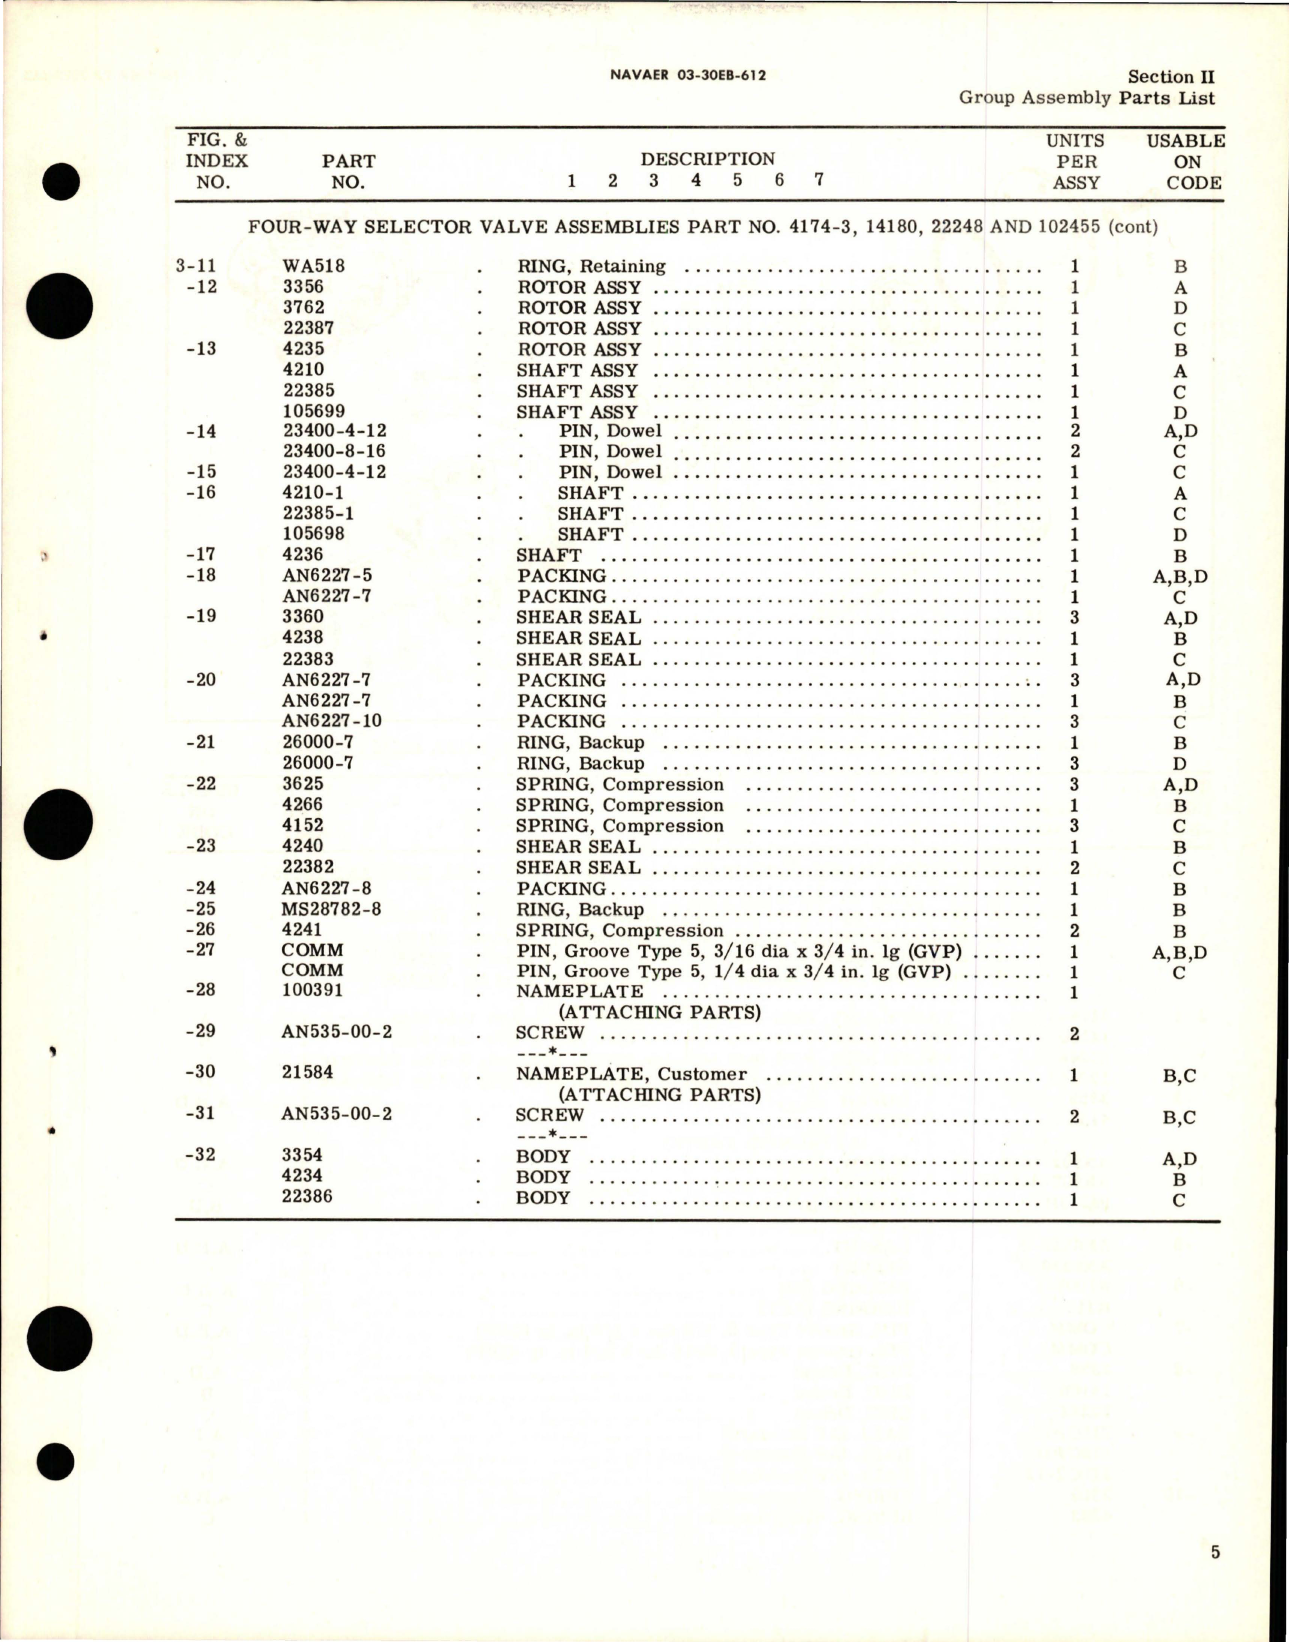 Sample page 7 from AirCorps Library document: Illustrated Parts Breakdown for Rotary Selector Valves